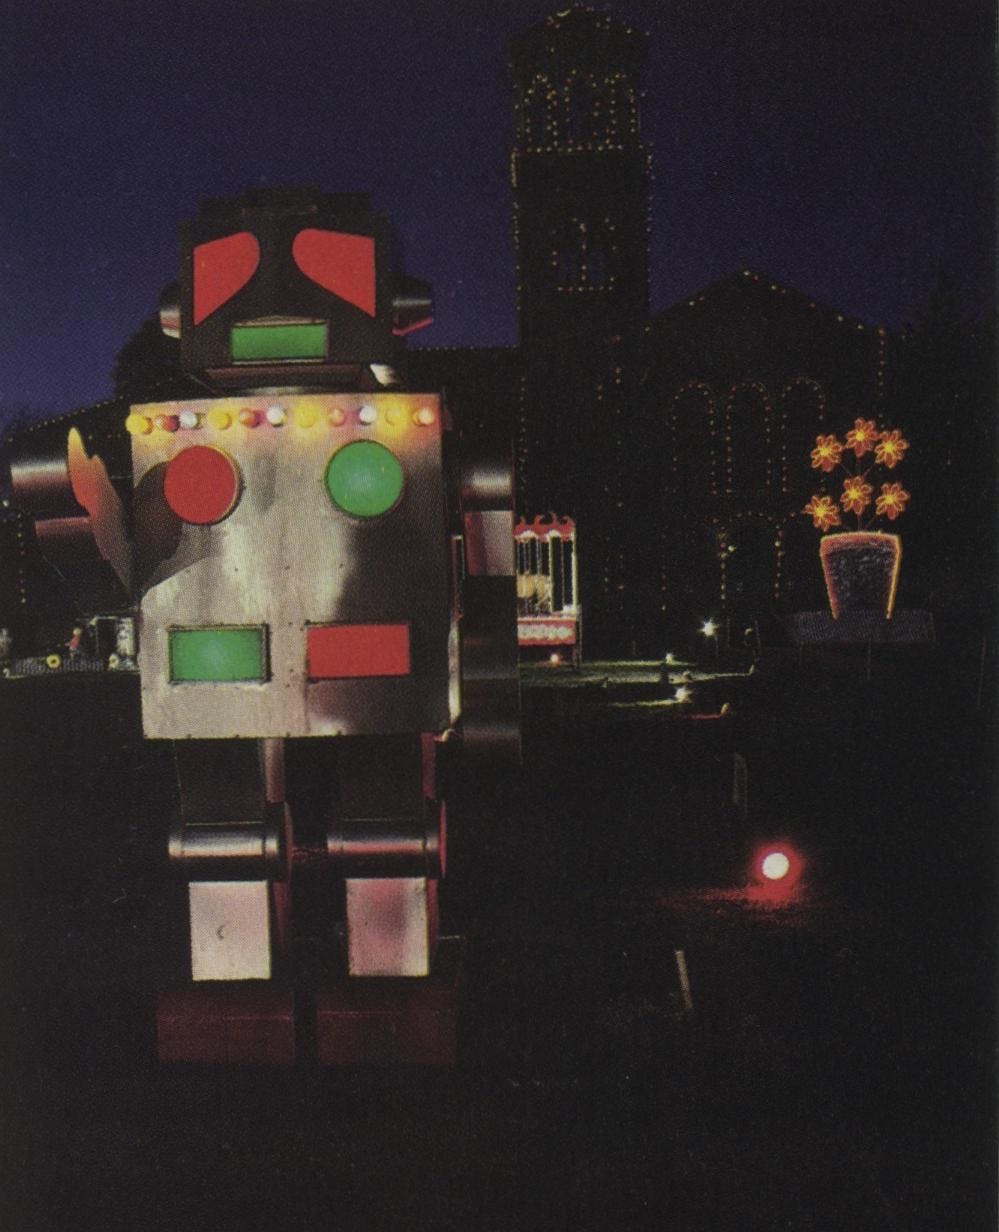 This robot is part of the elaborate concoction begun by the late L. T. and Lillian Burns. It is now operated by Midwestern State University in Wichita Falls.